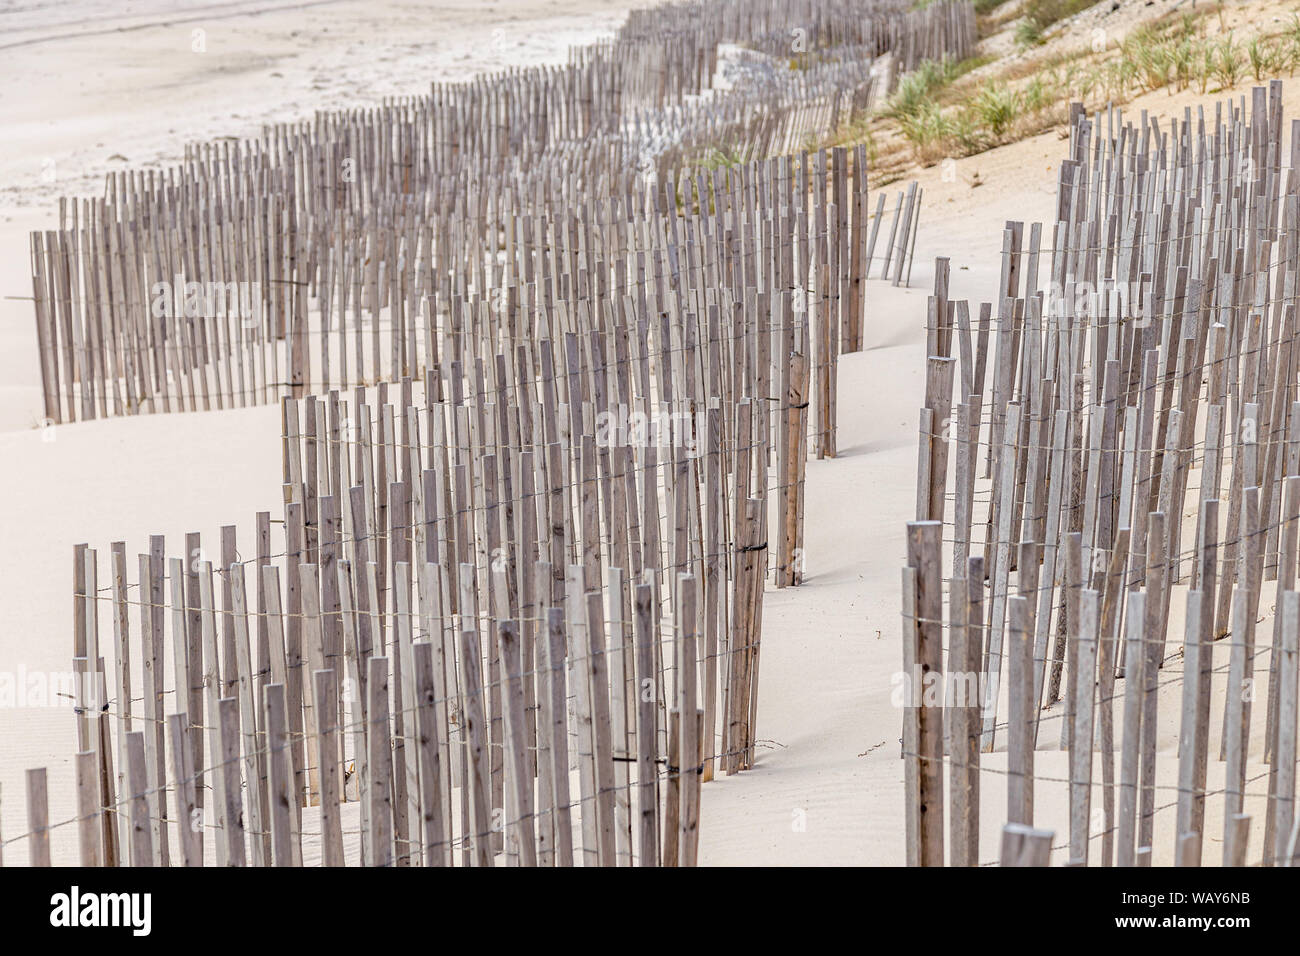 Wooden fence at a windy and sandy beach, Long Island, New York Stock Photo